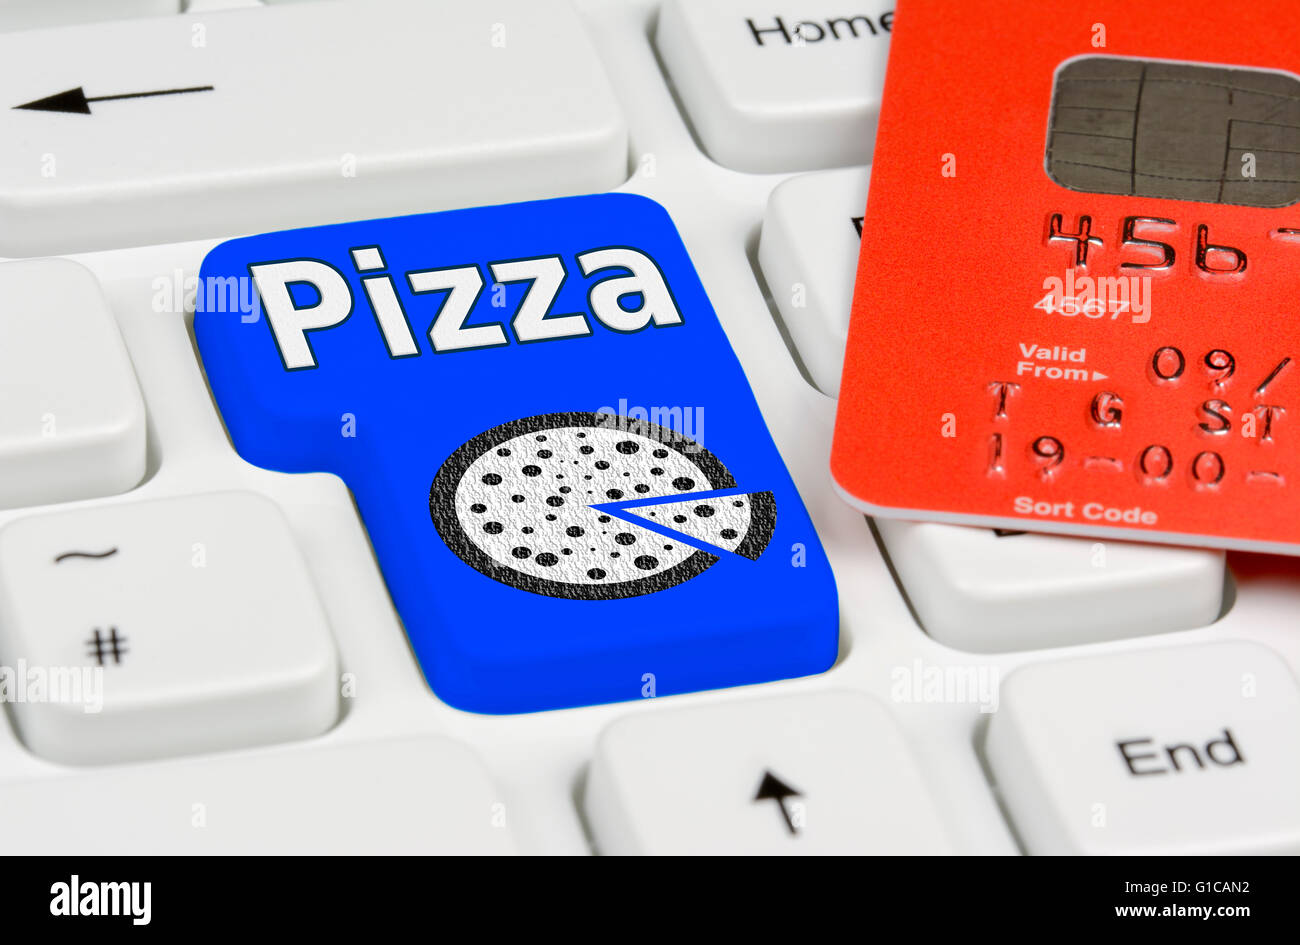 Pizza ordering button with debit card on a computer keyboard. Stock Photo